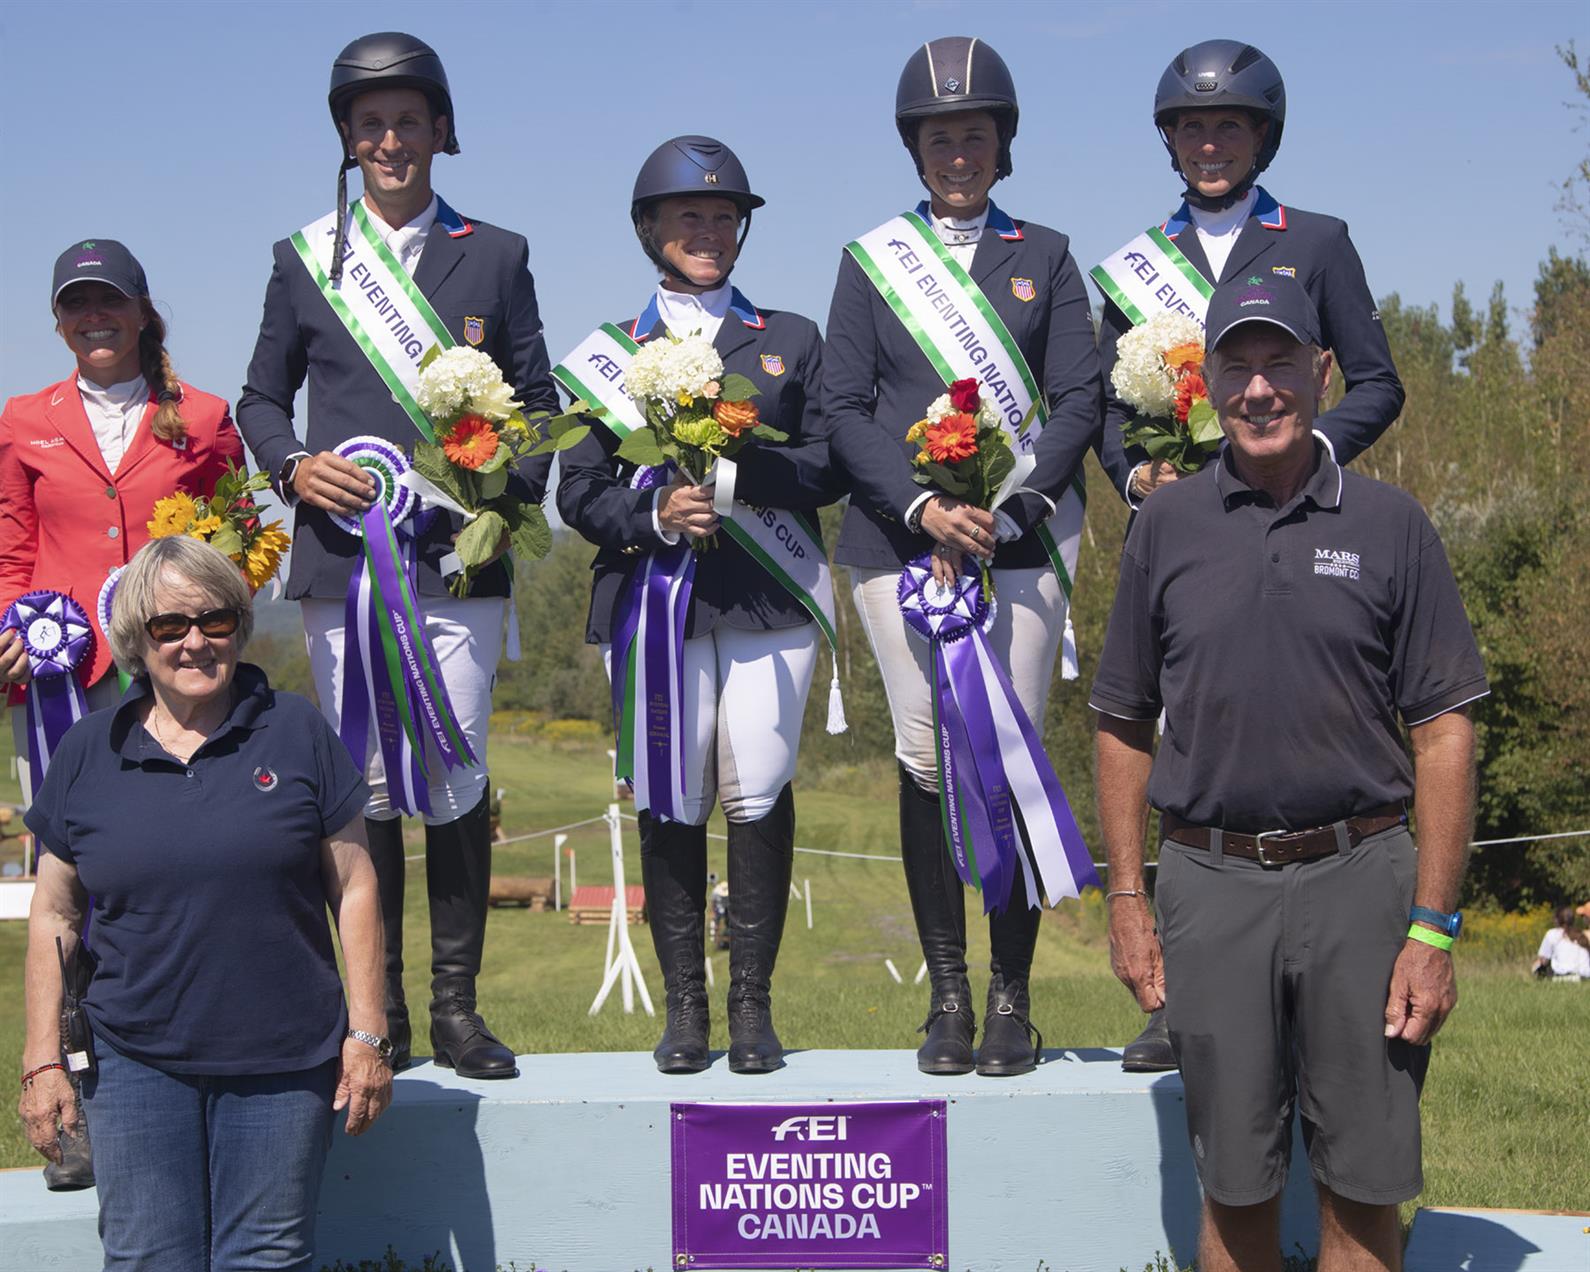 U.S. Gold Medal Eventing Team from the Bromont CCIO4*